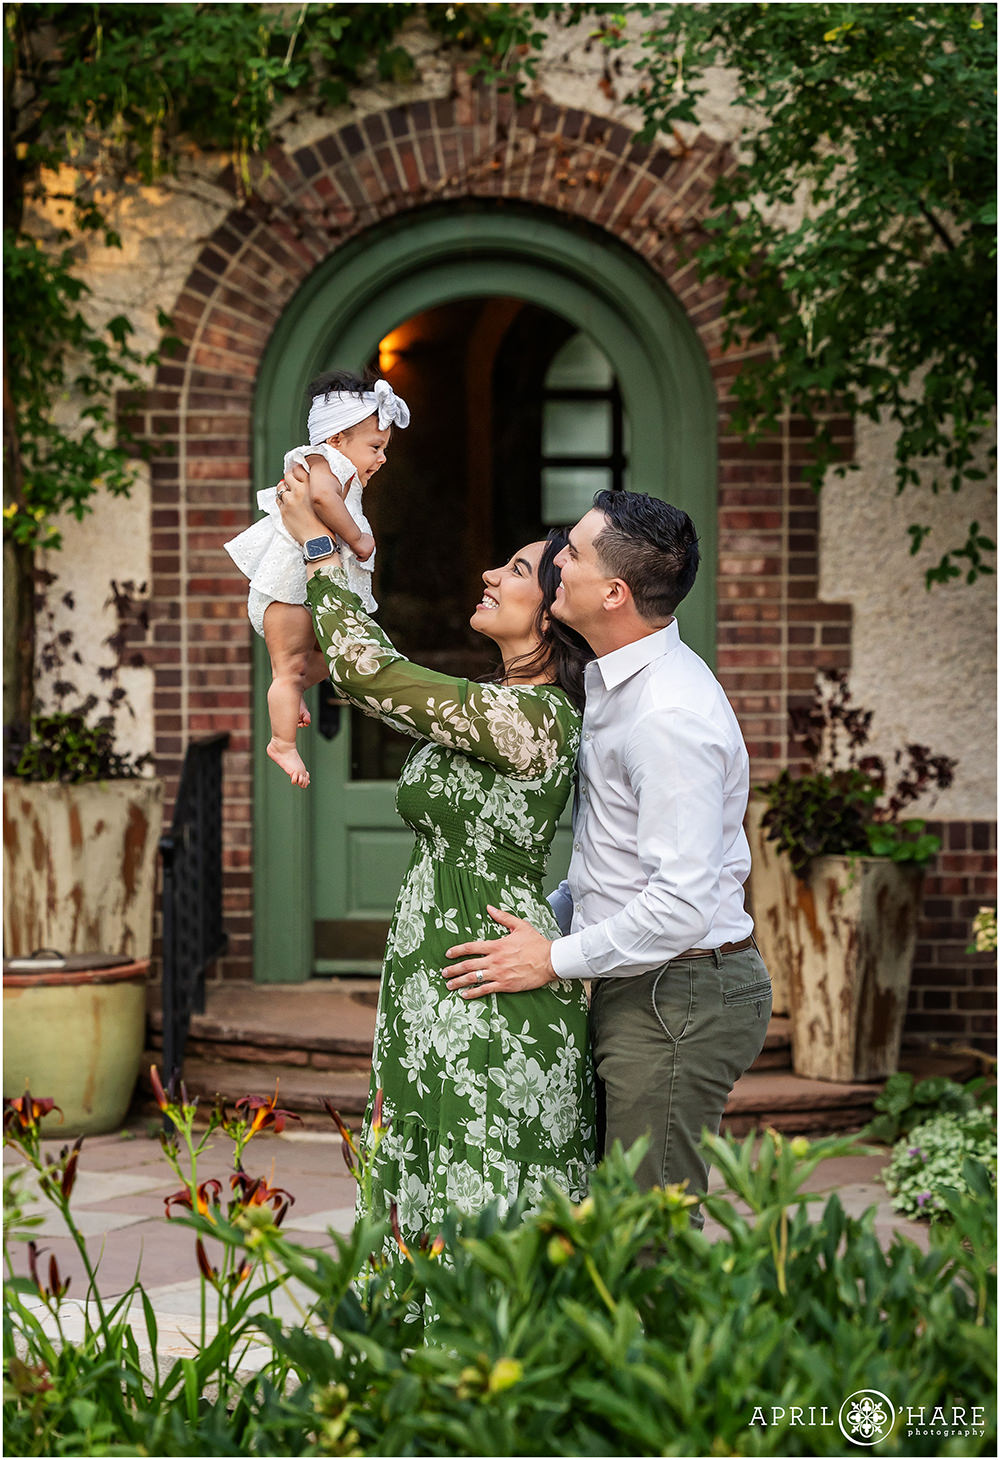 Adorable candid photo of a family of three as they lift their baby girl up in the air with a pretty arched doorway backdrop behind them at Denver Botanic Gardens